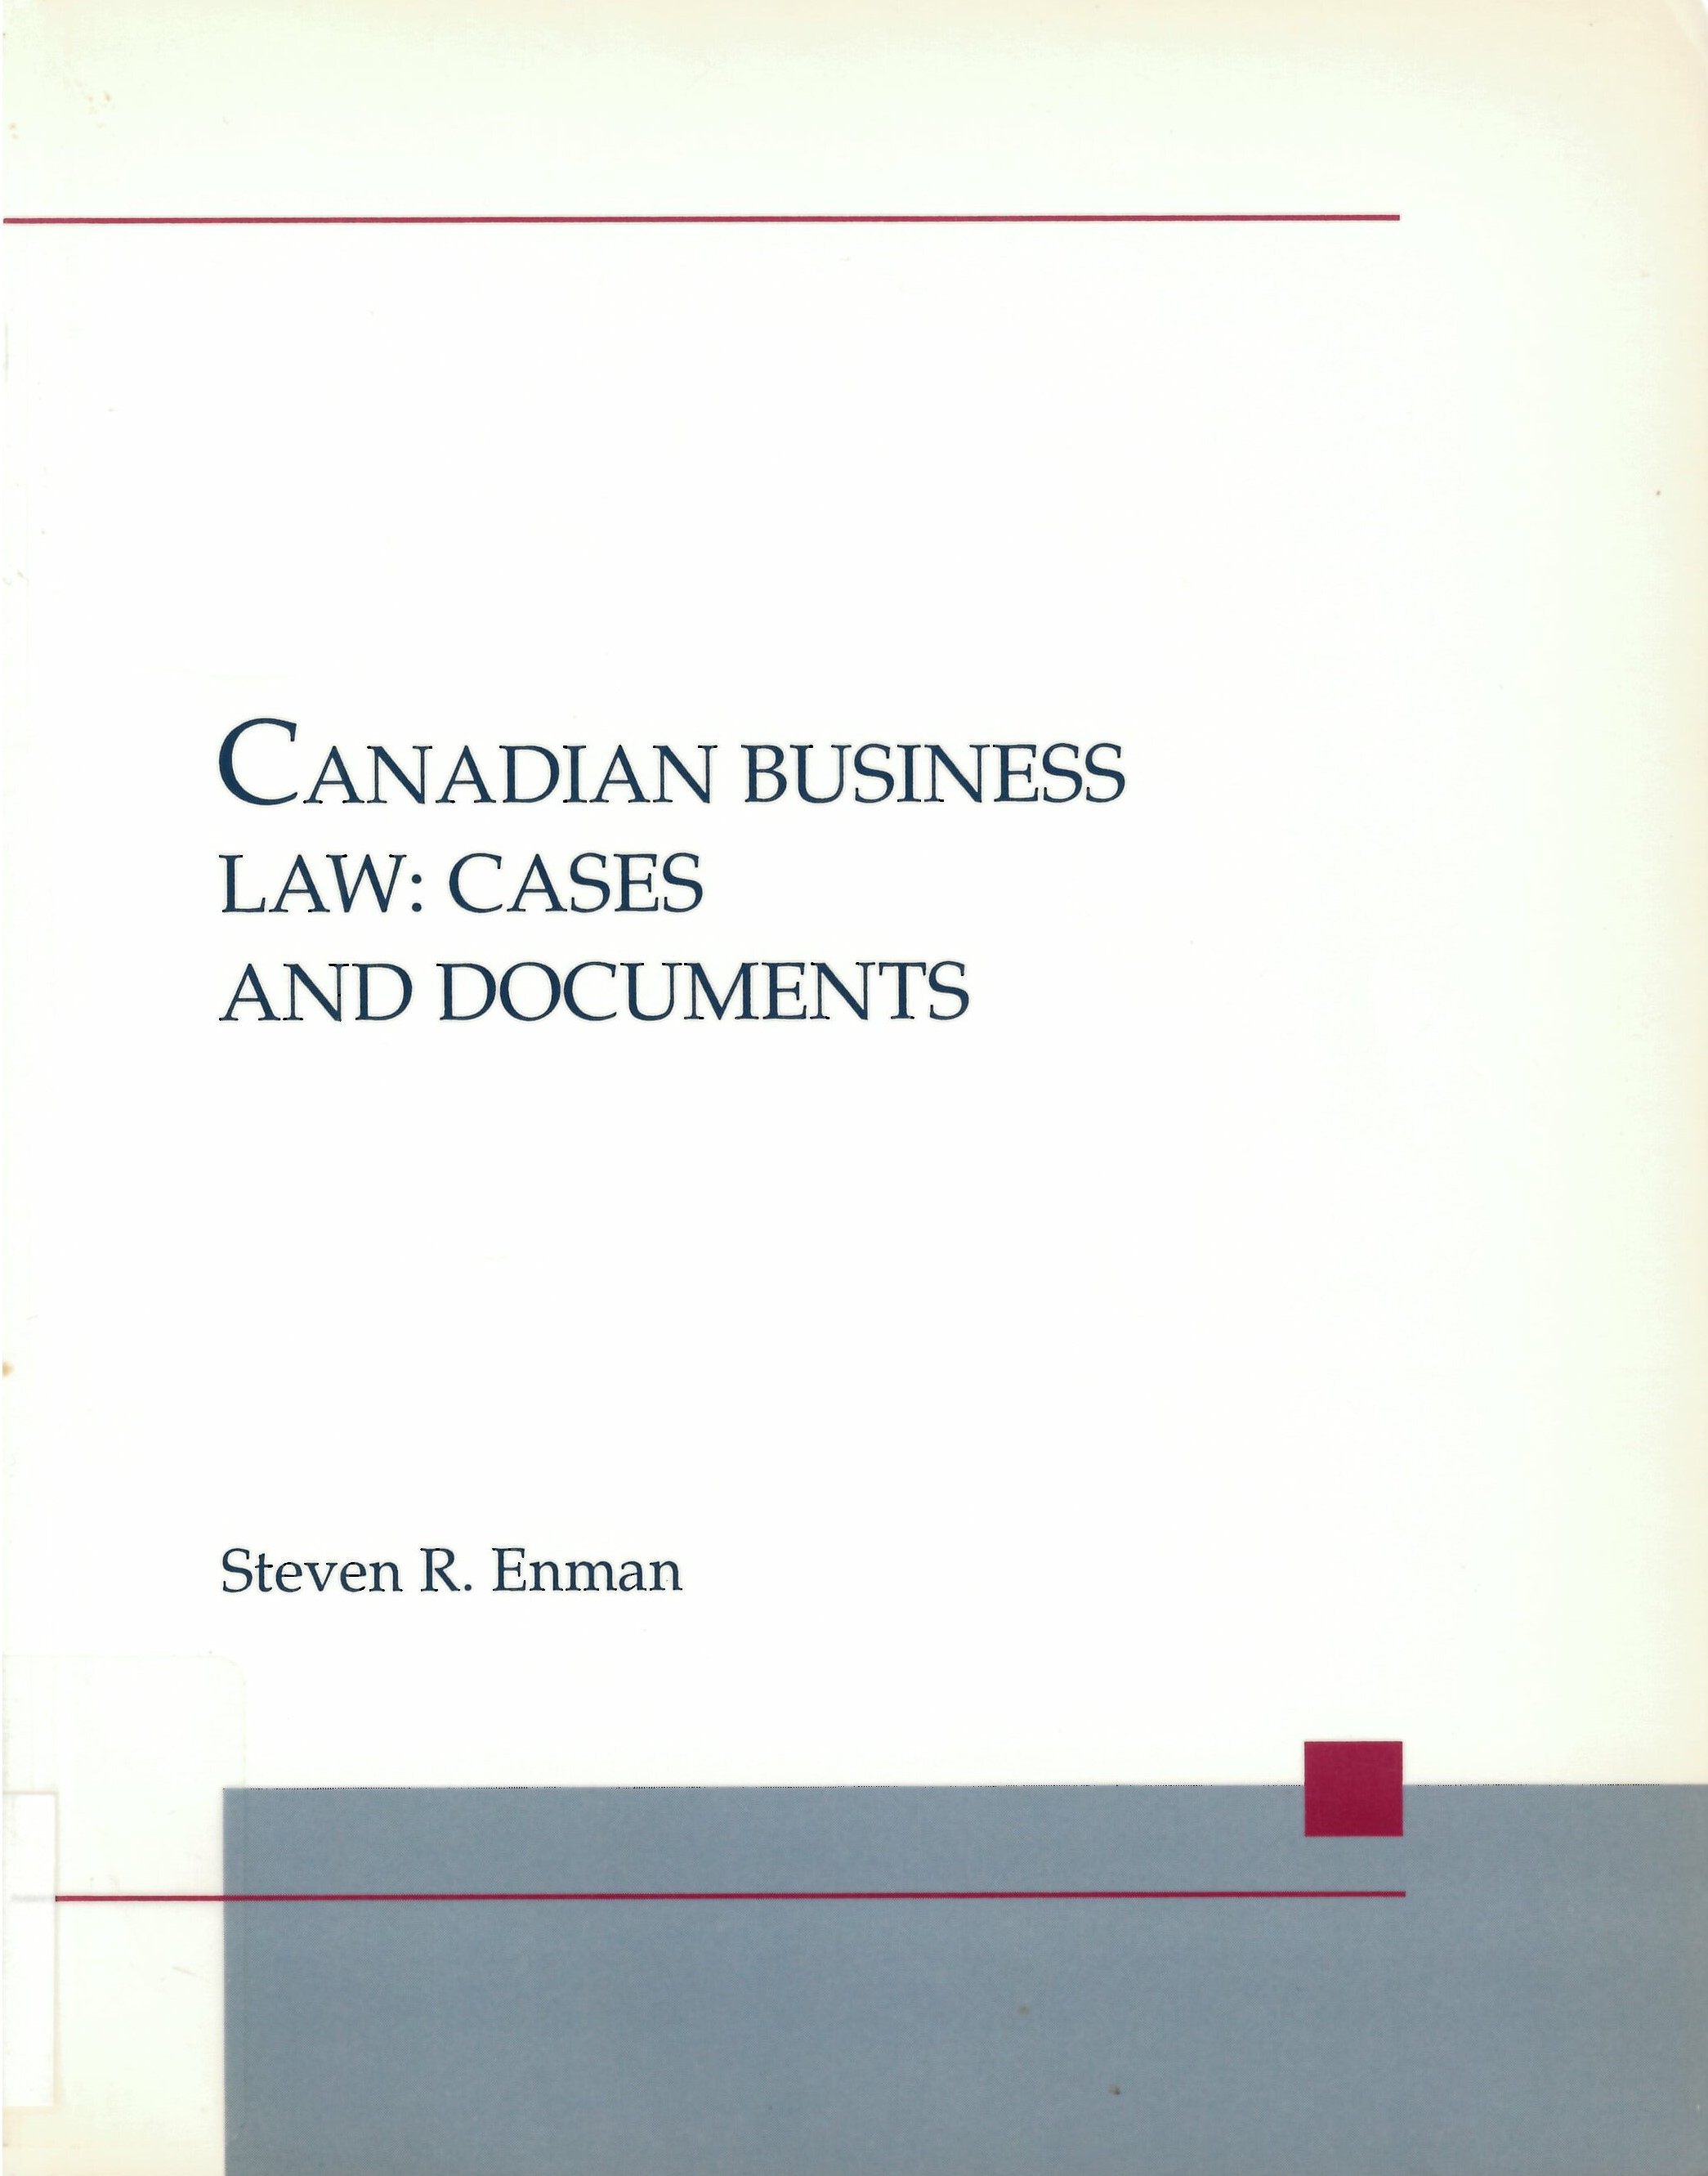 Canadian business law : cases and documents